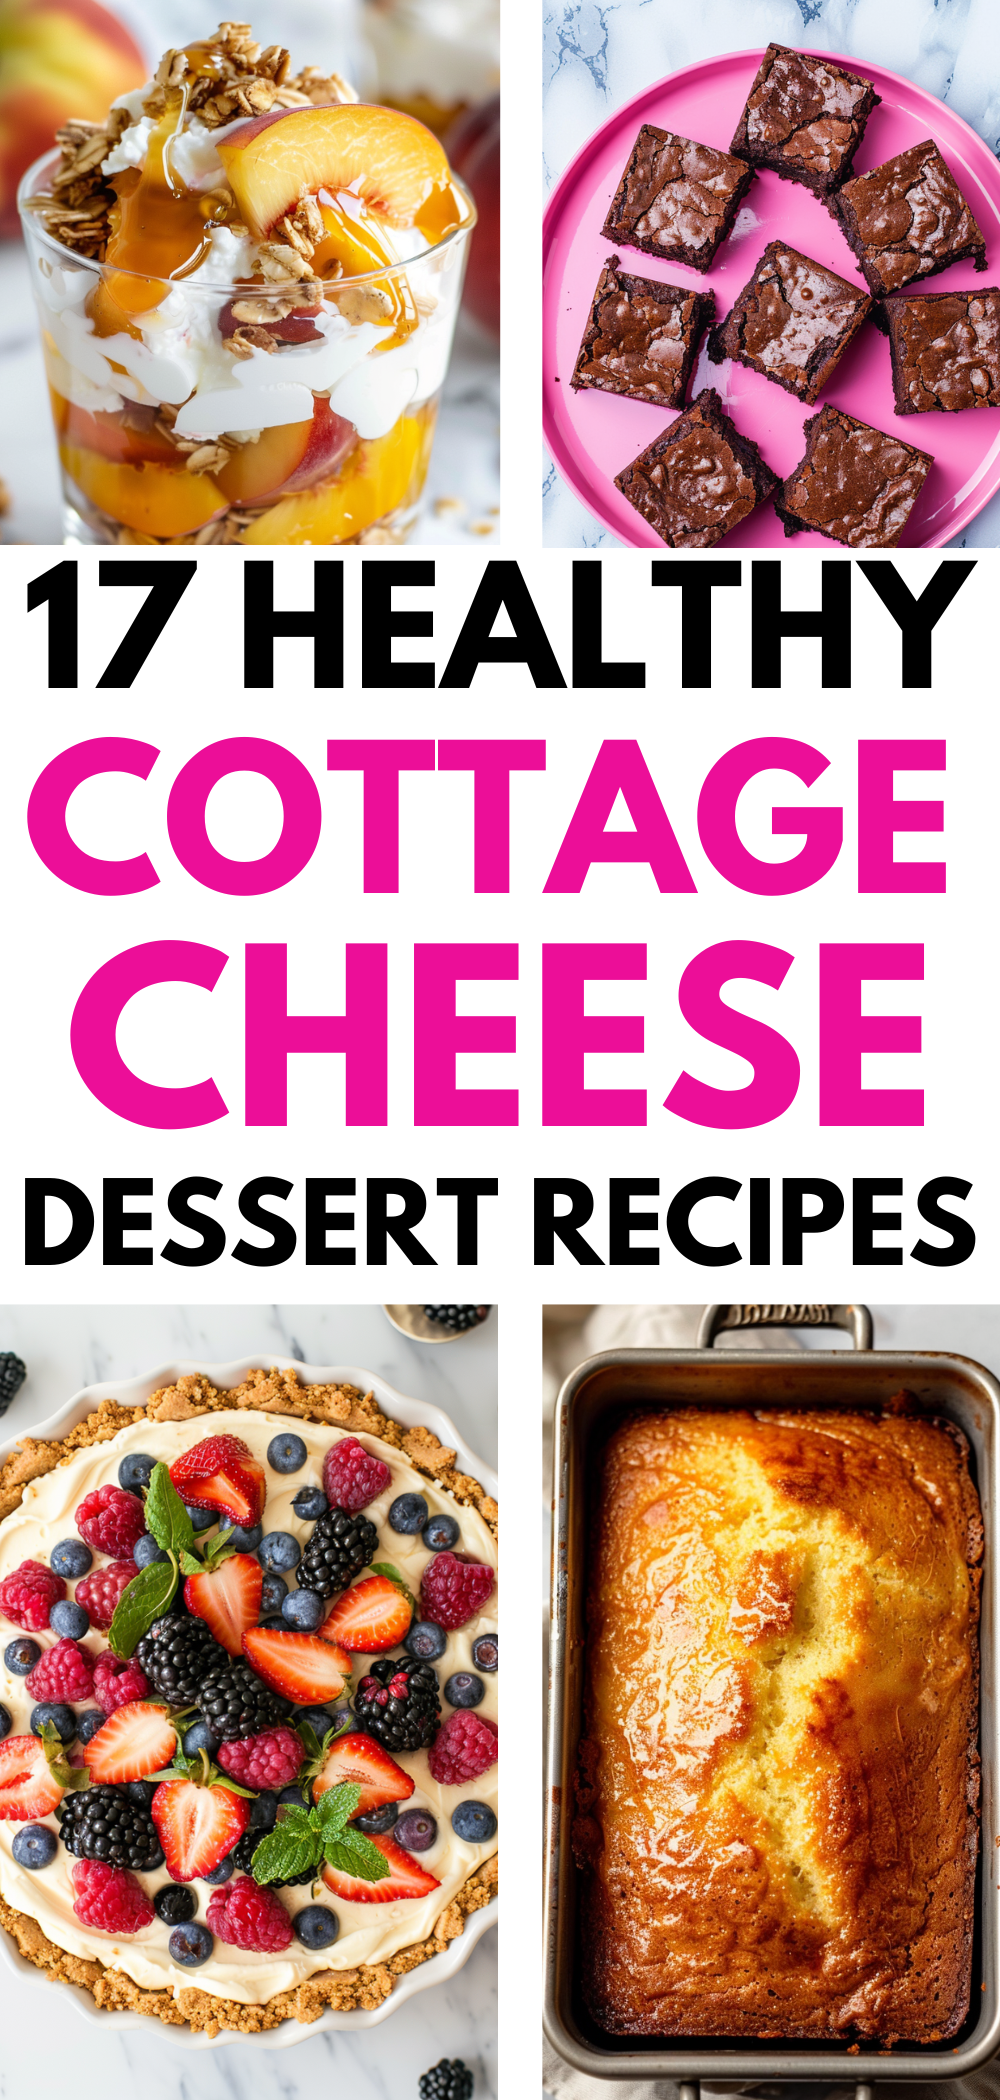 17 healthy cottage cheese dessert recipes